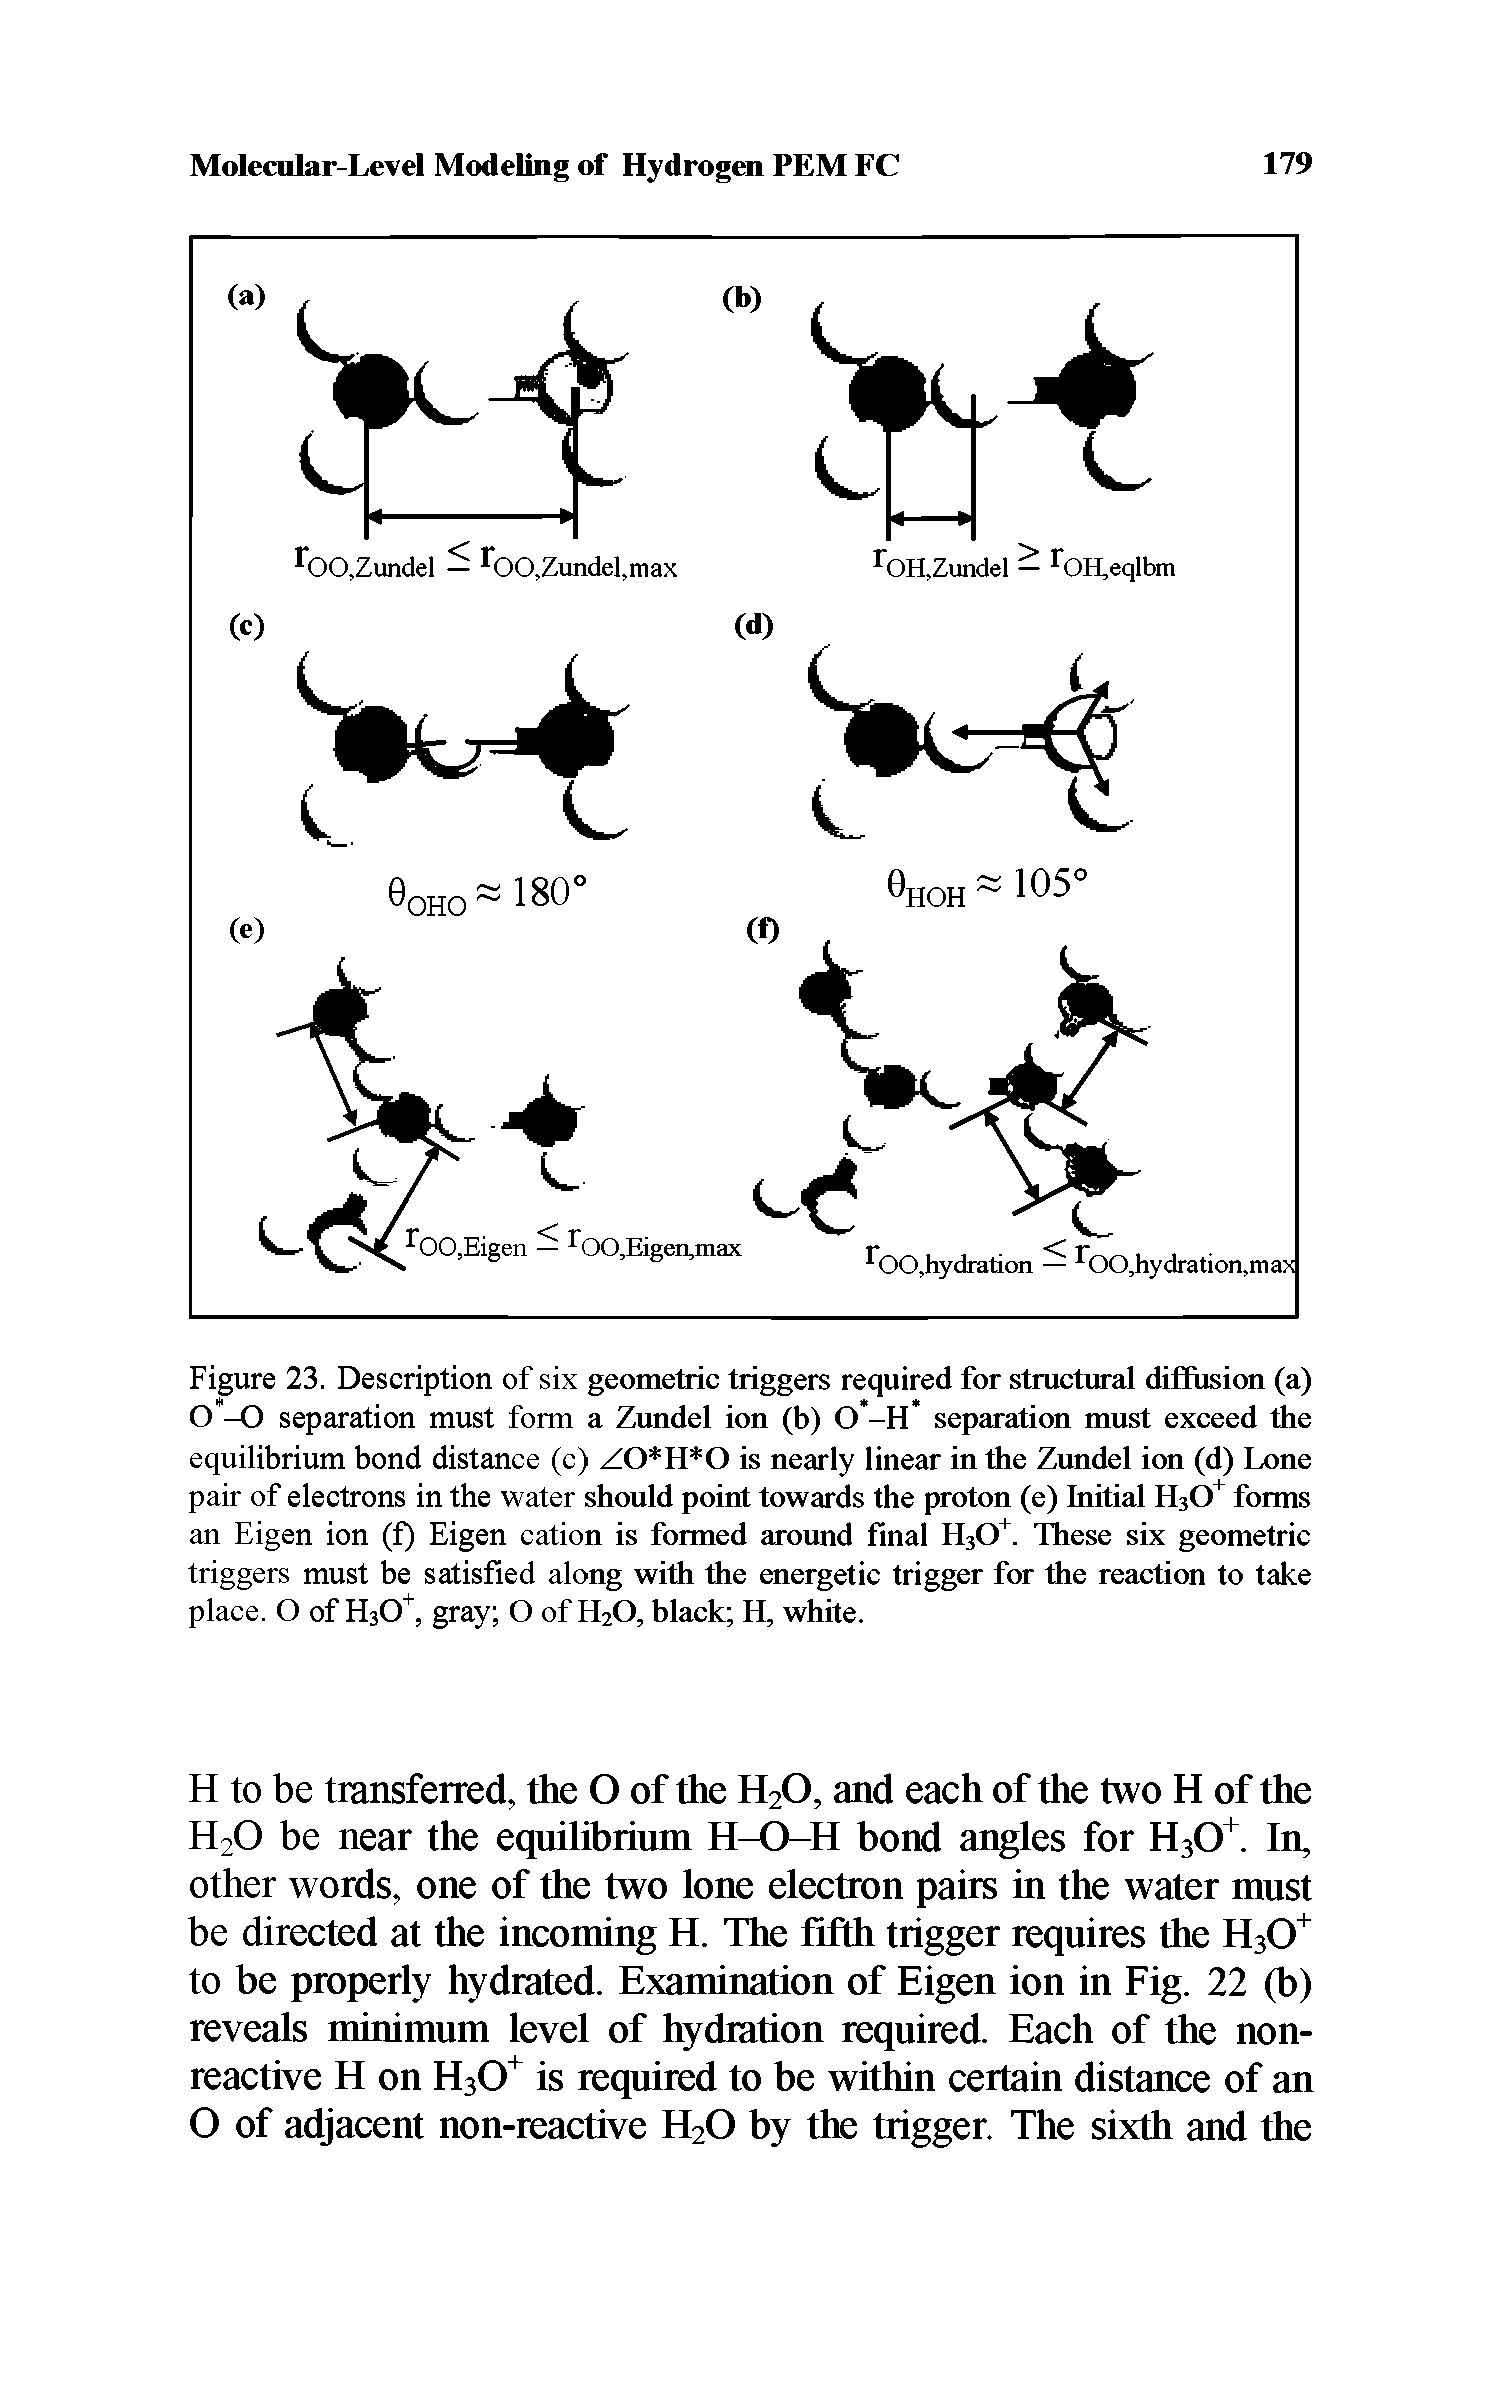 Figure 23. Description of six geometric triggers required for structural diffusion (a) O -O separation must form a Zundel ion (b) O -H separation must exceed the equilibrium bond distance (c) Z0 H 0 is nearly linear in the Zundel ion (d) Lone pair of electrons in the water should point towards the proton (e) Initial H3O forms an Eigen ion (f) Eigen cation is formed around final H3O. These six geometric triggers must he satisfied along with the energetic trigger for the reaction to take place. O of H3O, gray O of H2O, black H, white.